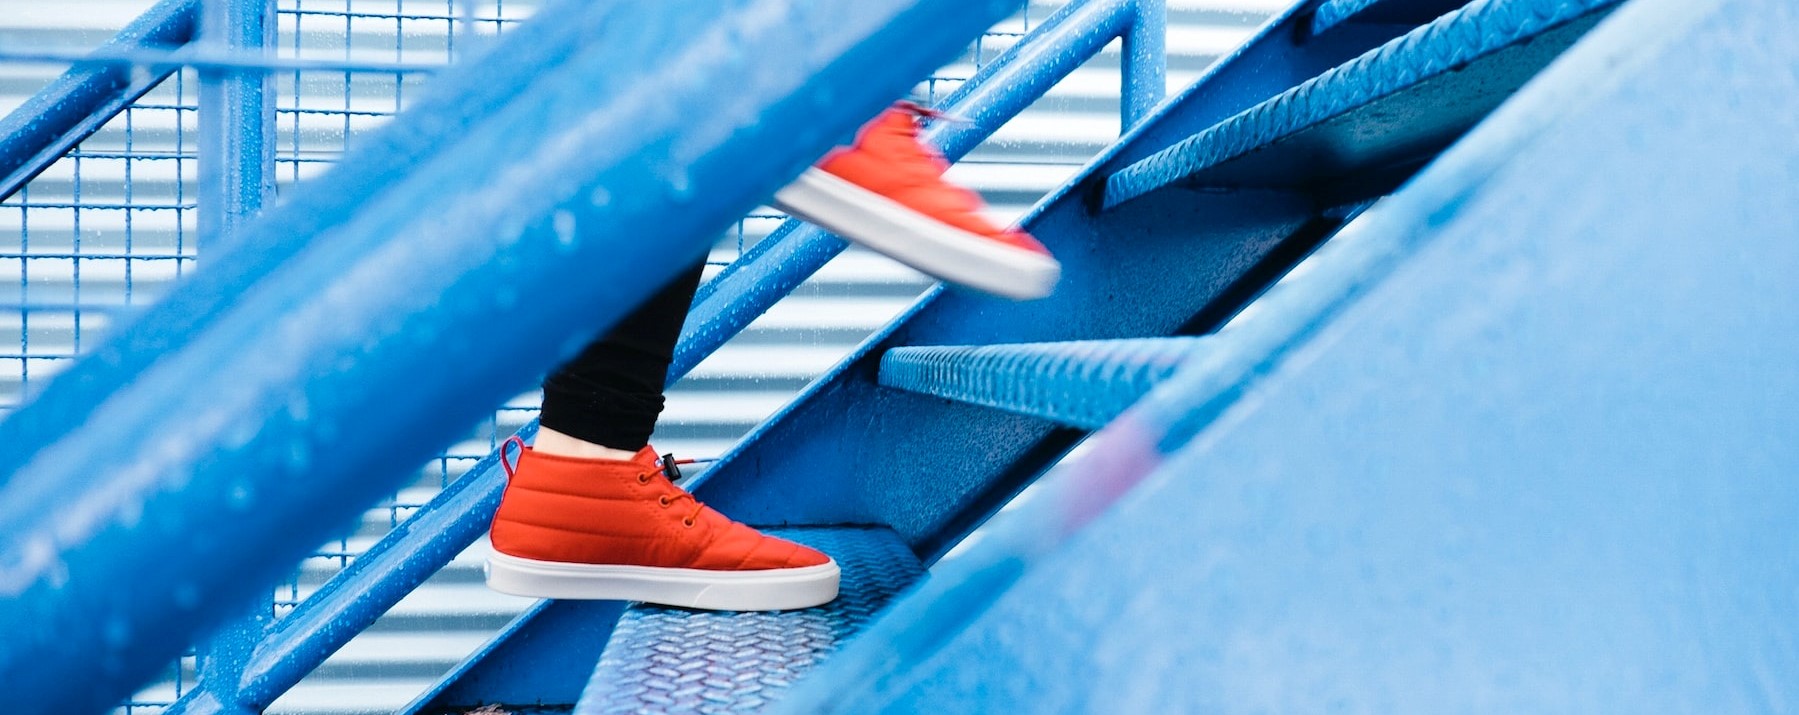 Person stepping on blue stairs by Lindsay Henwood, CC0